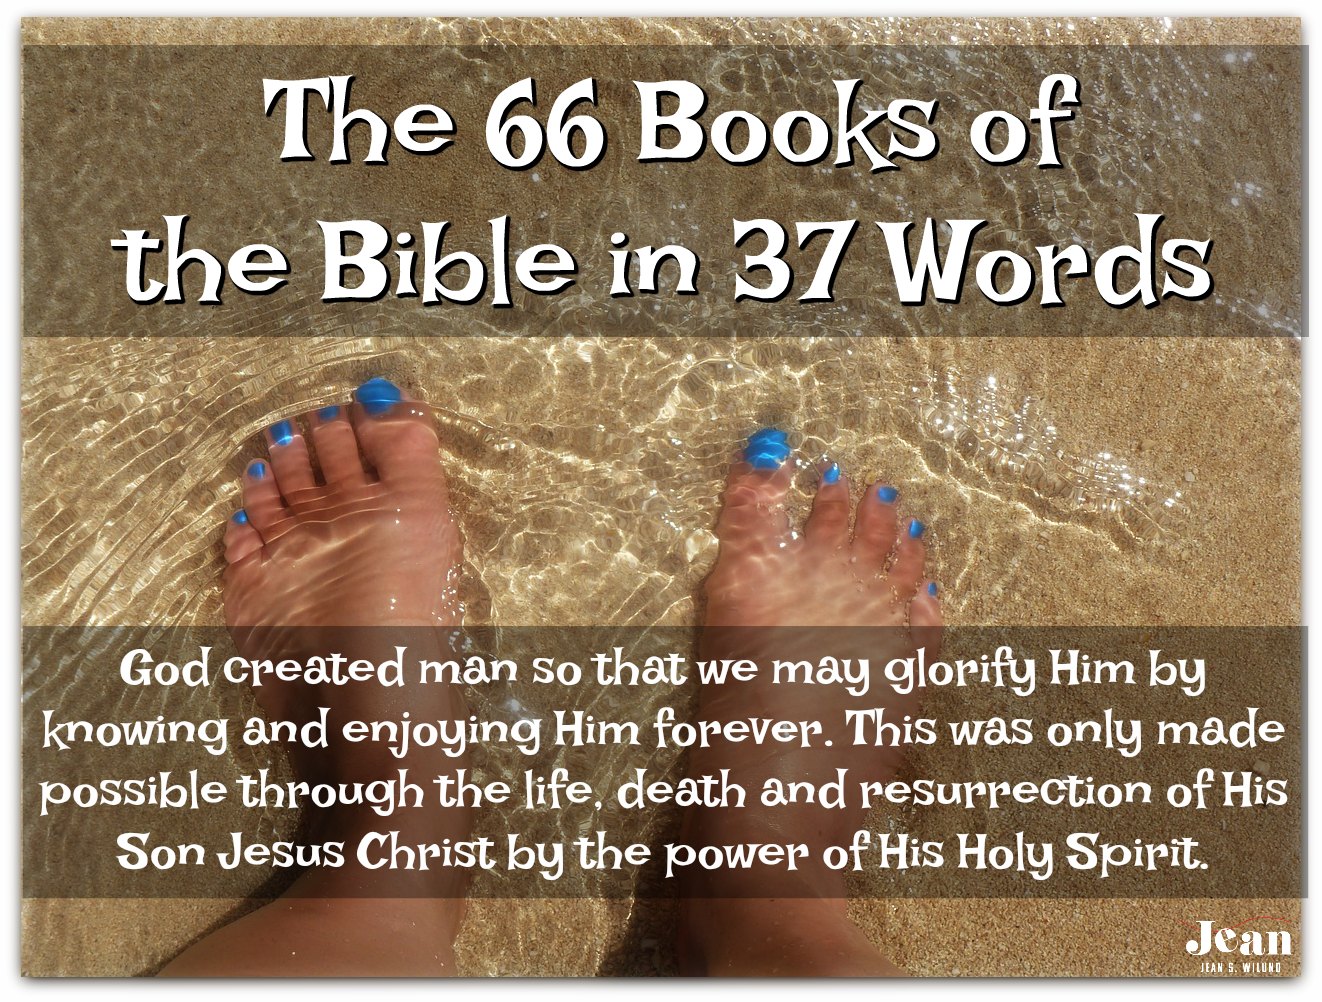 the-66-books-of-the-bible-in-37-words-jean-wilund-christian-writer-speaker-bible-teacher